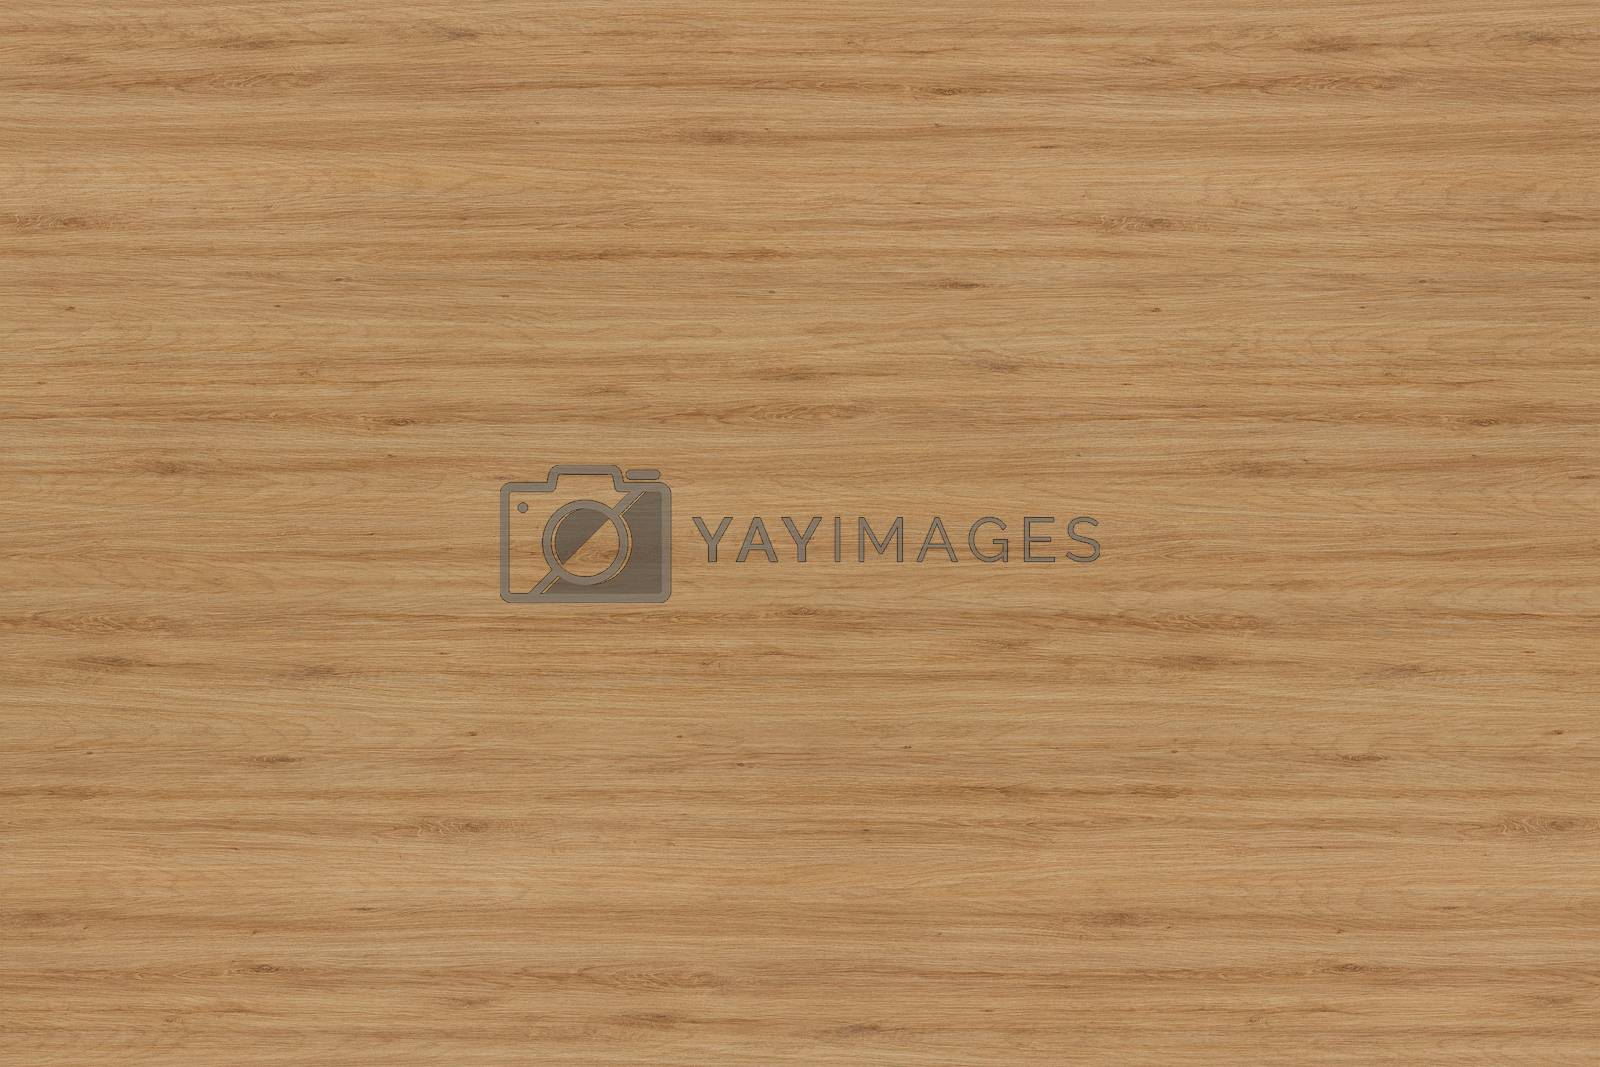 Royalty free image of Grunge wood pattern texture background, wooden background texture. by ivo_13